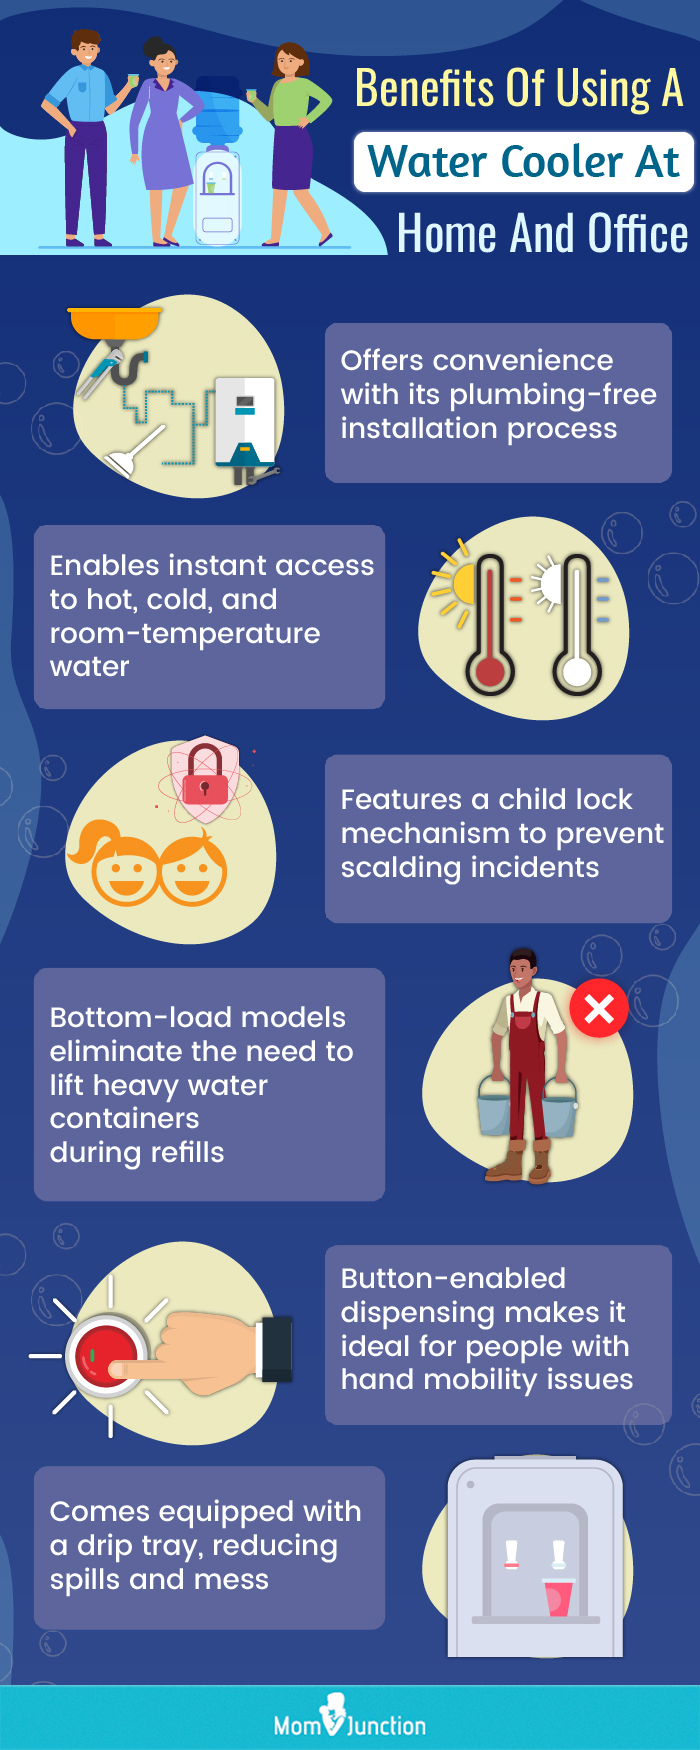 Benefits Of Using A Water Cooler At Home And Office (infographic)